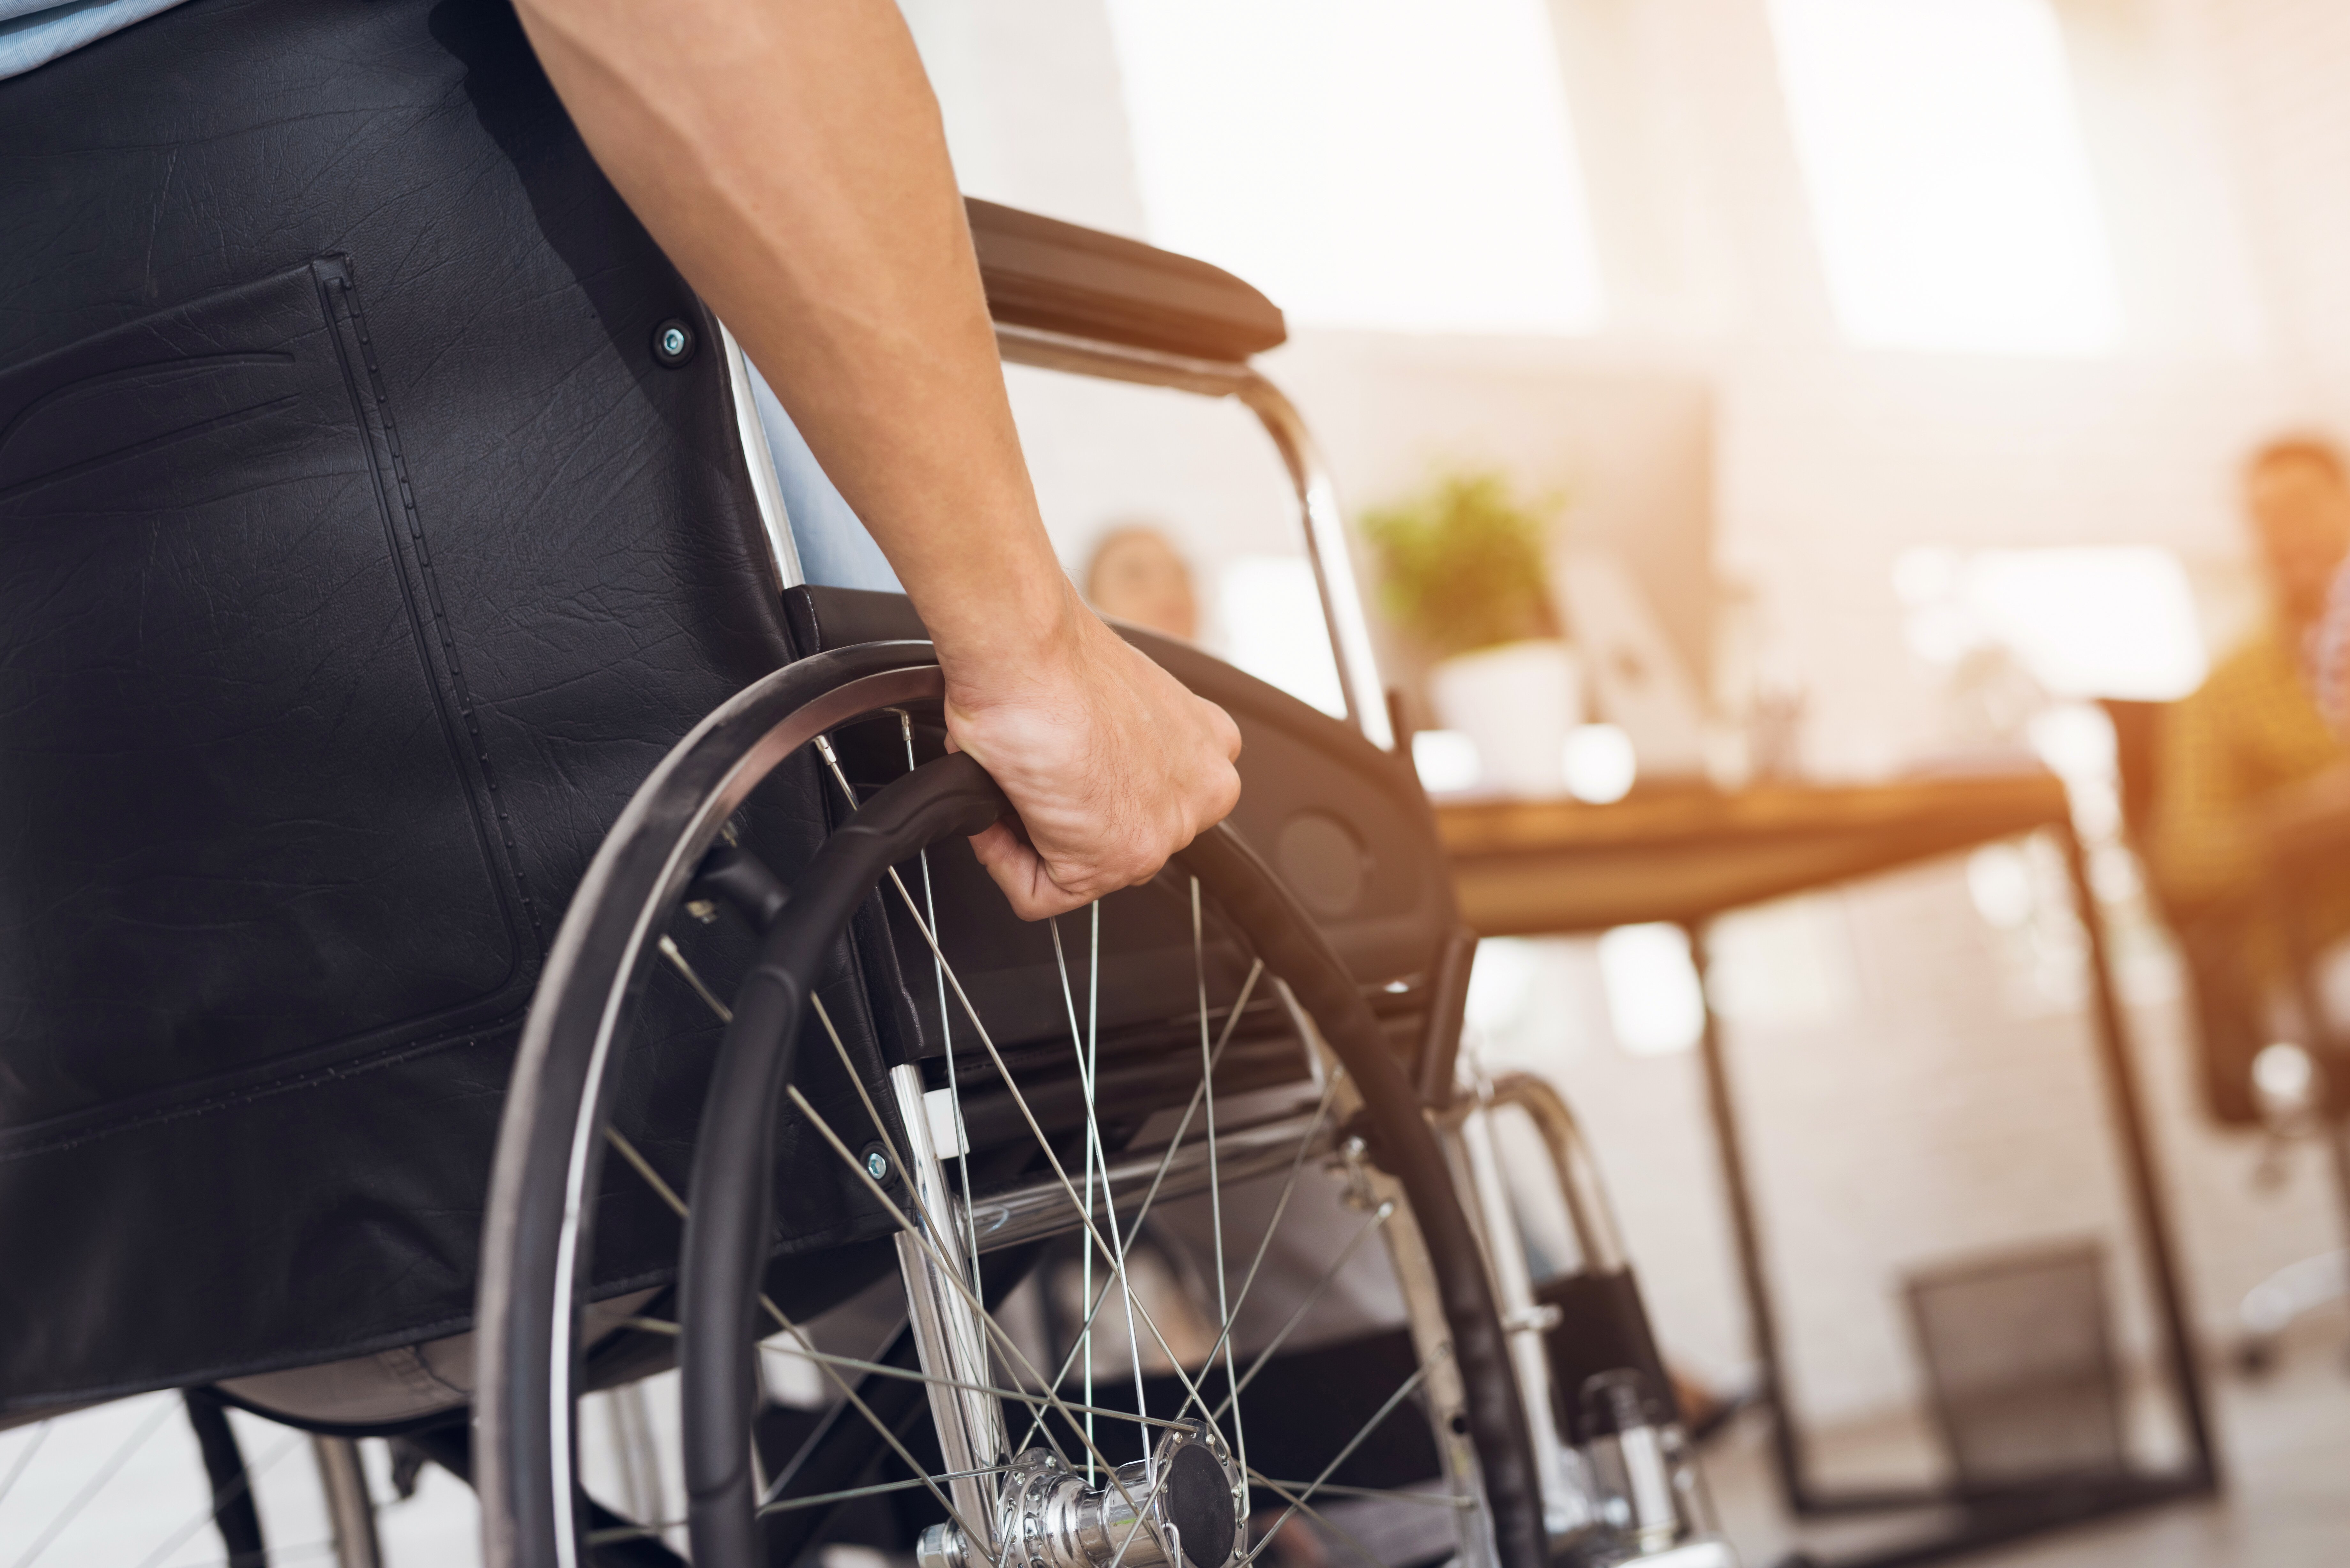 Survey reveals concerns over disabled access in hospitality industry